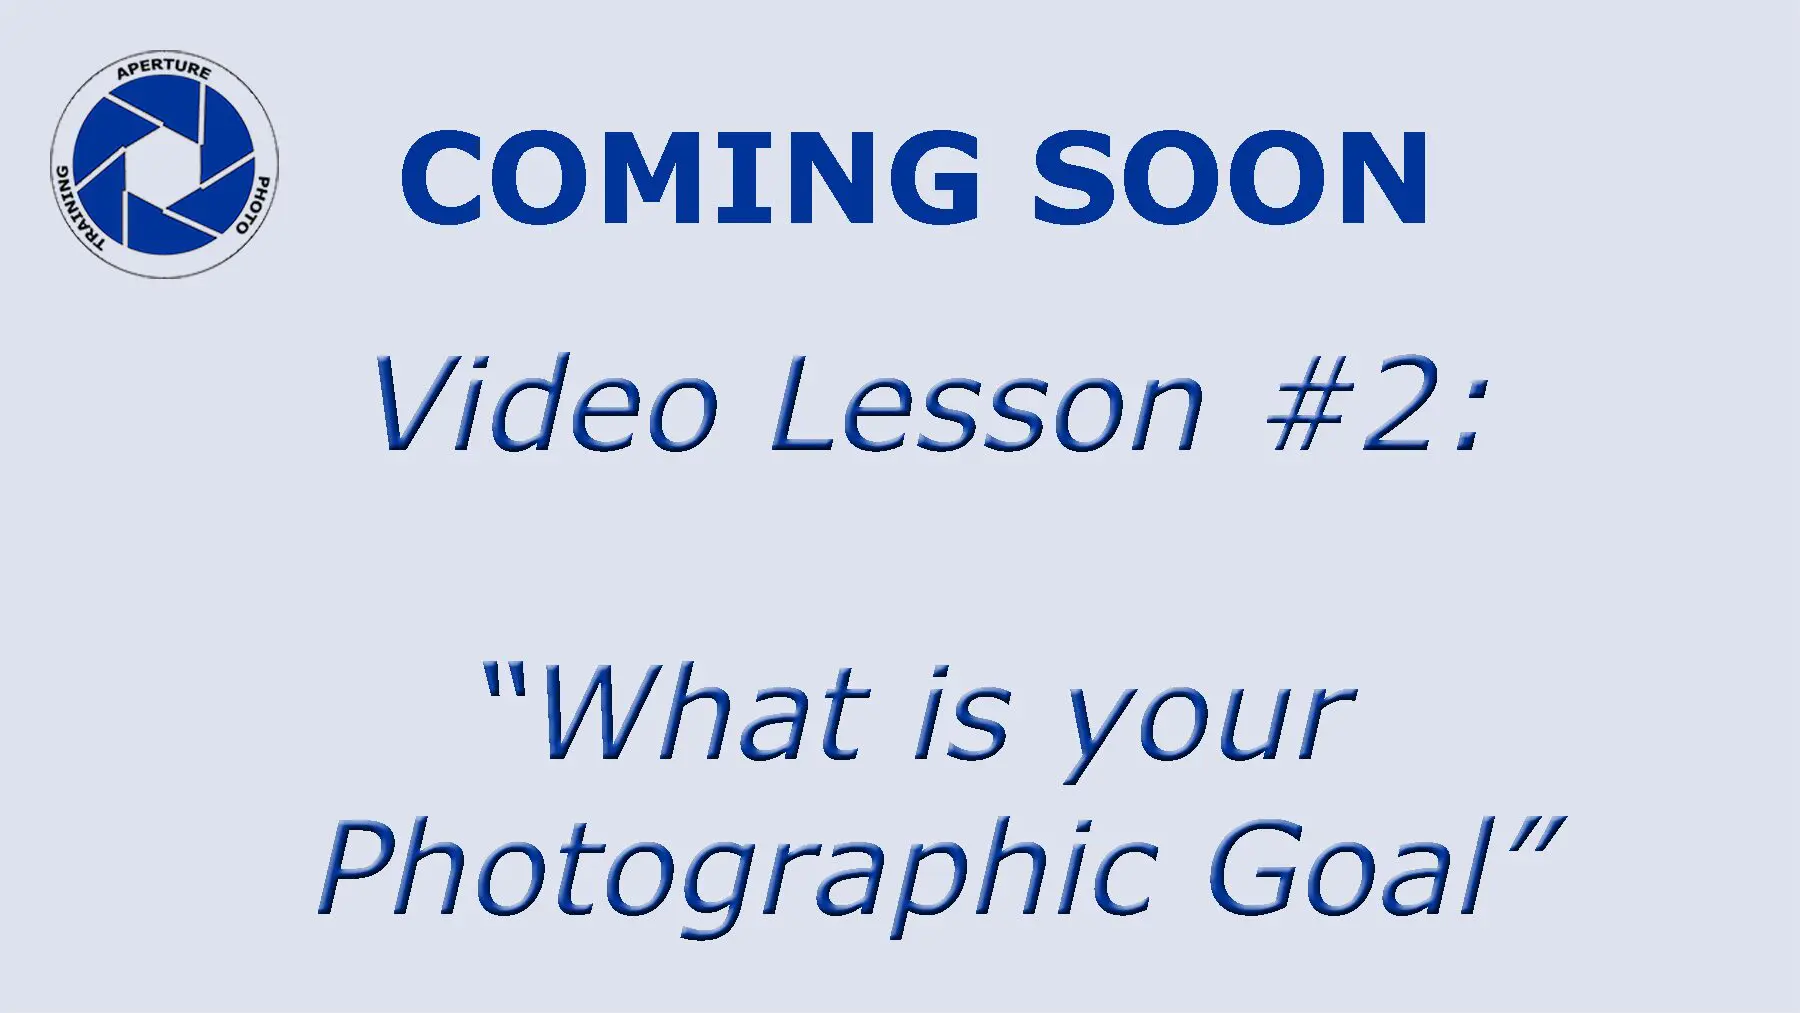 Text about a video lesson on photographic goals